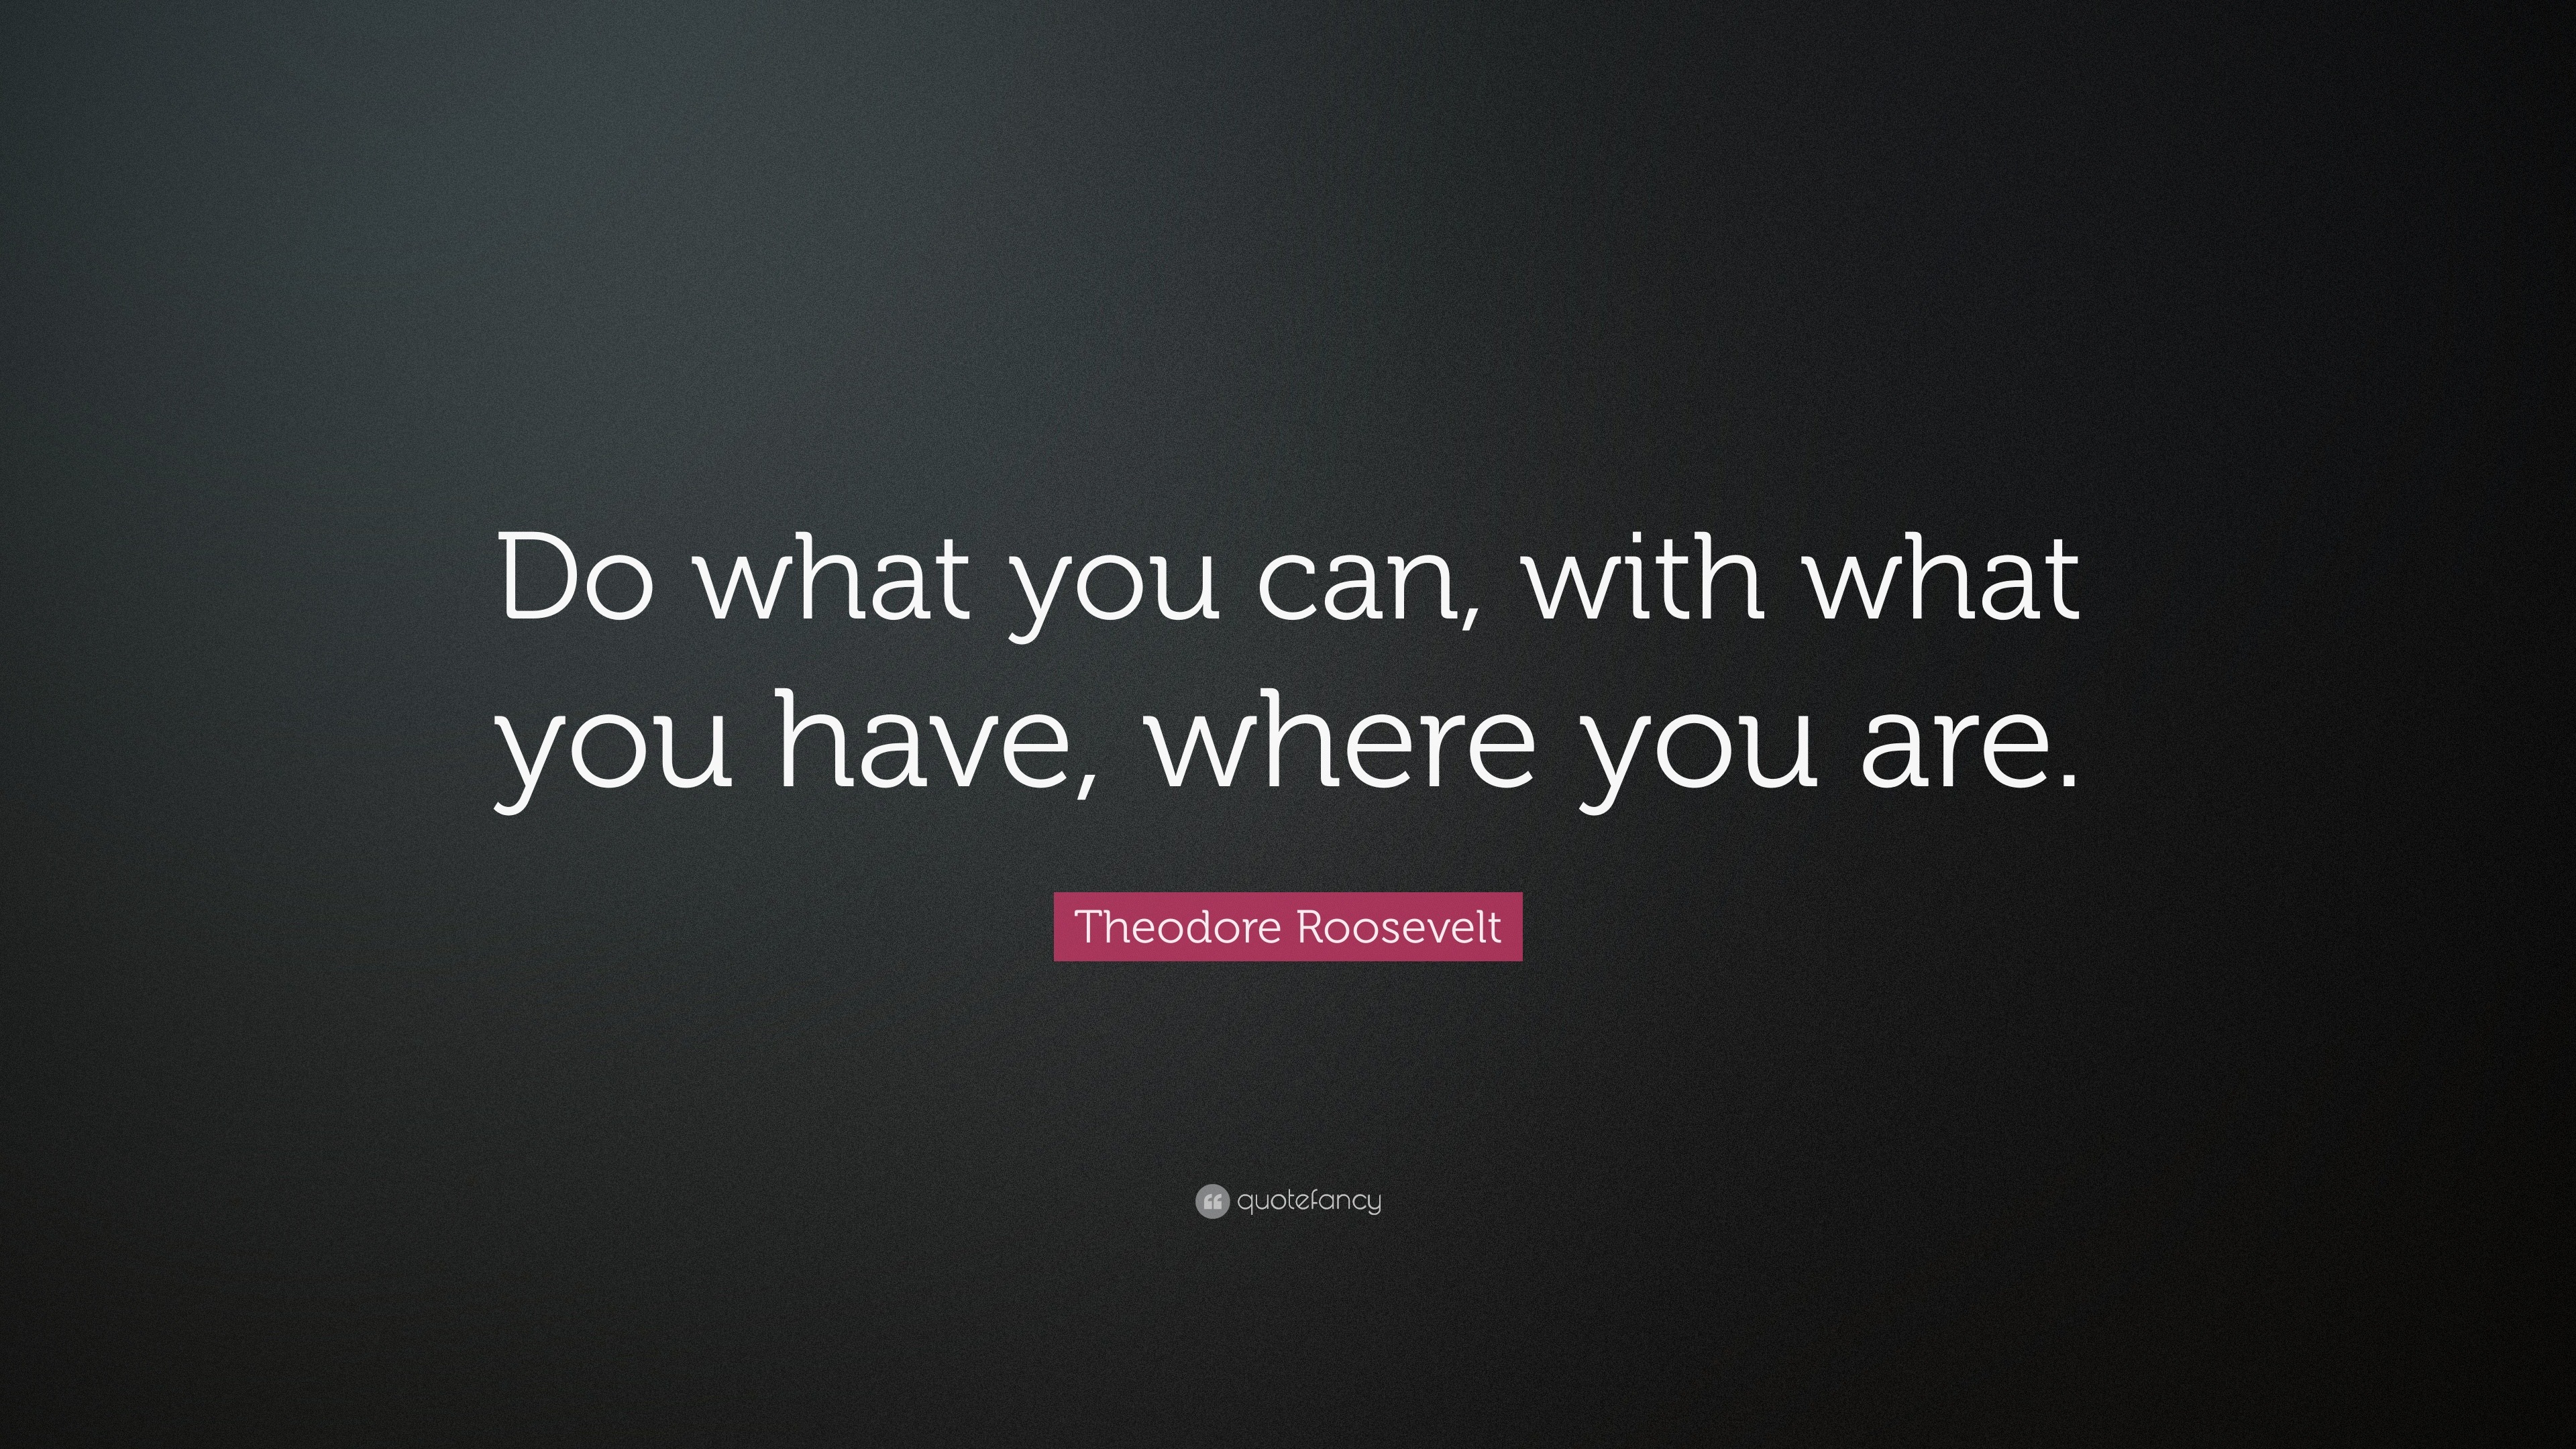 You can say what you like. Do what you can with what you have where you are. Theodore Roosevelt do what you can. What can you do. What can you do картинки.